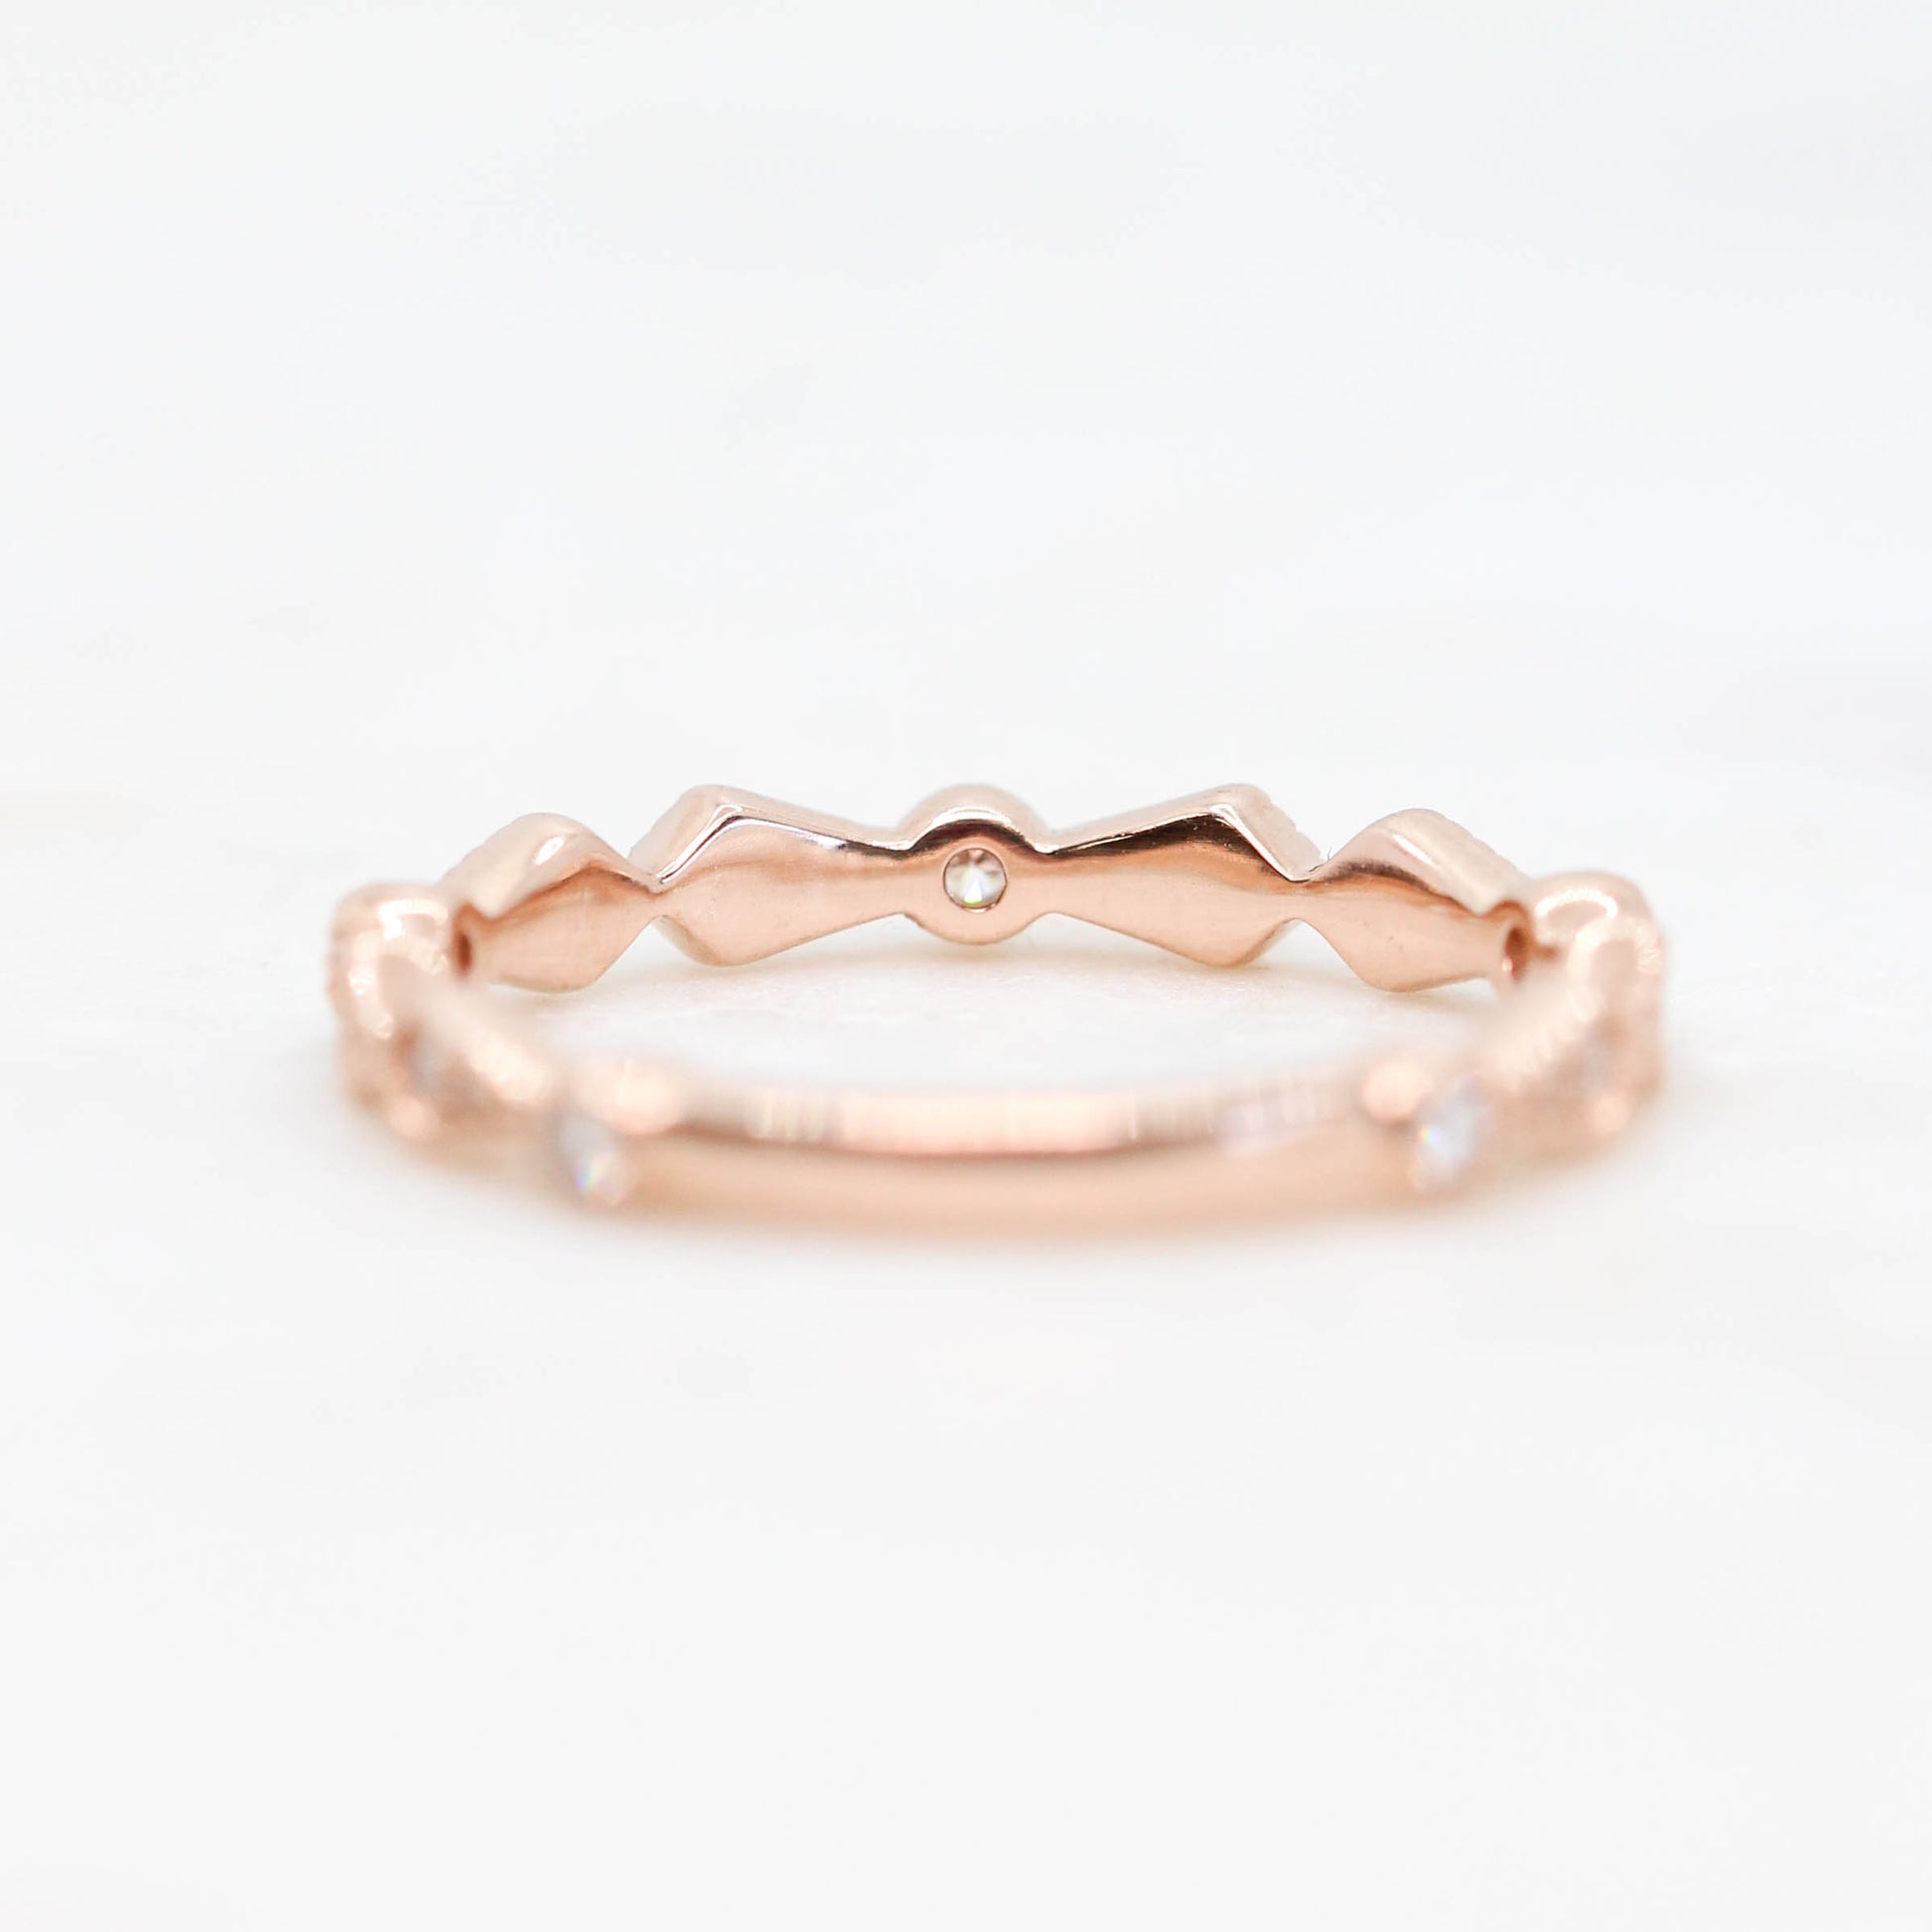 CAELEN (J) Evelyn - Stackable Wedding Band in Your Choice of Gold - Midwinter Co. Alternative Bridal Rings and Modern Fine Jewelry